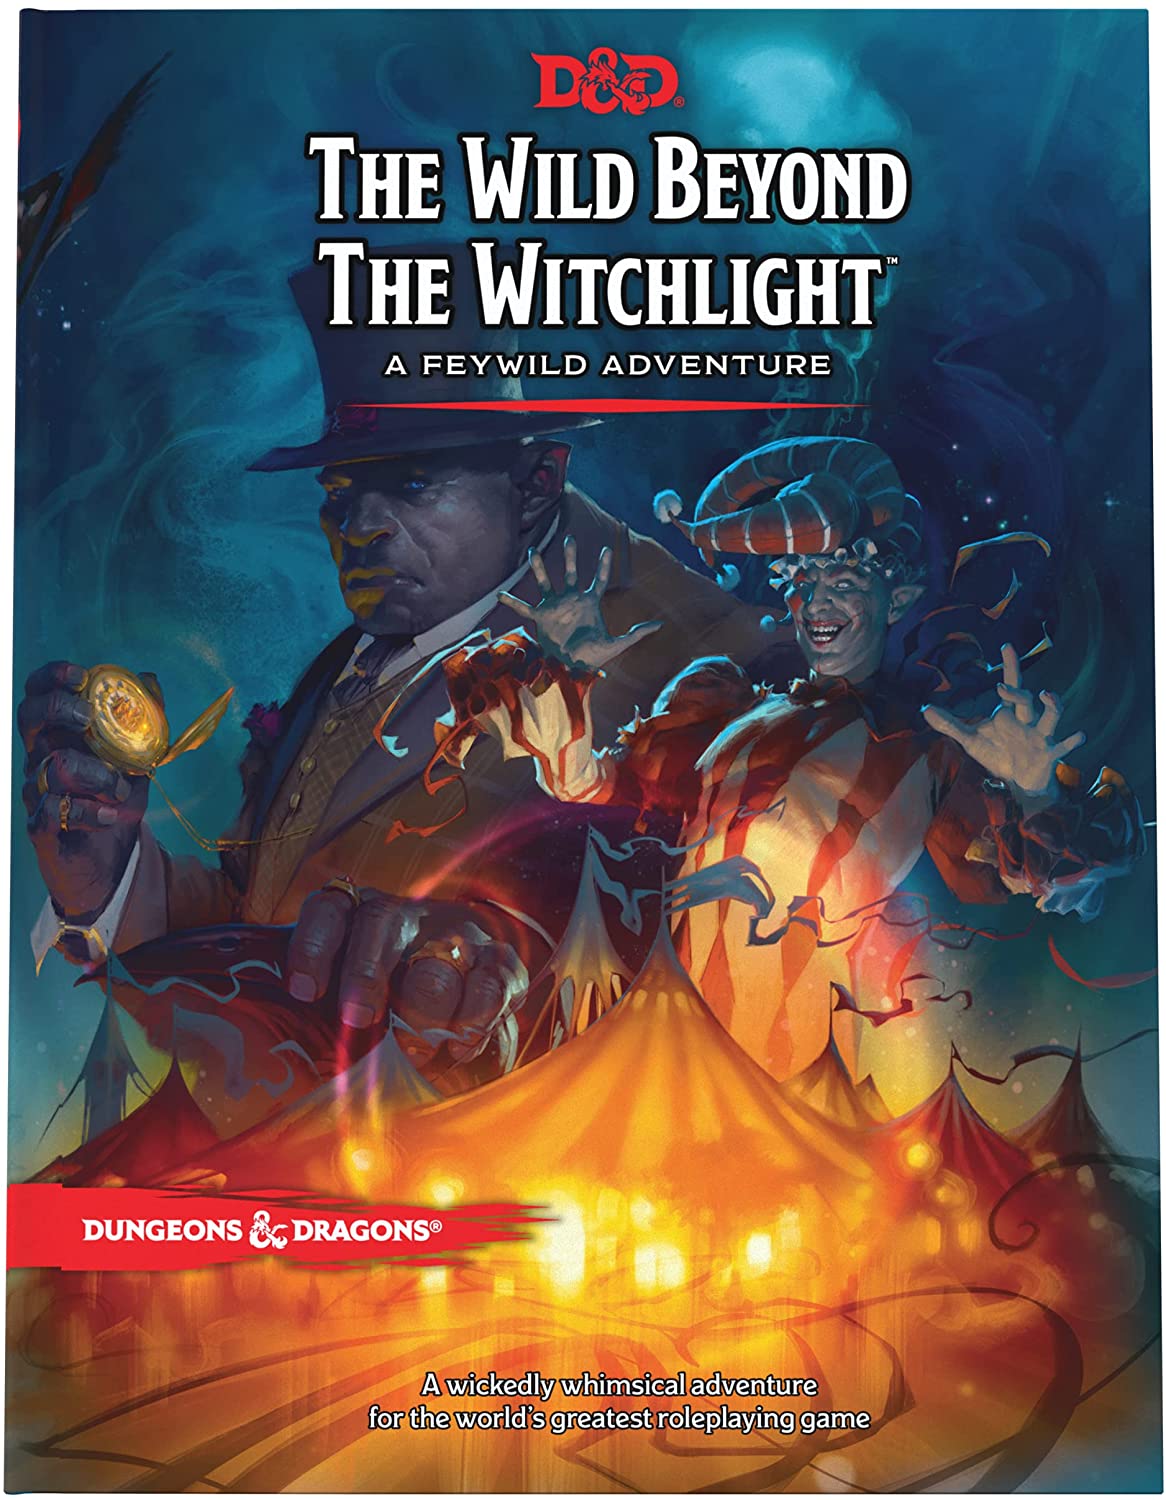 The Wild Behind the Witchlight Book - Bards & Cards